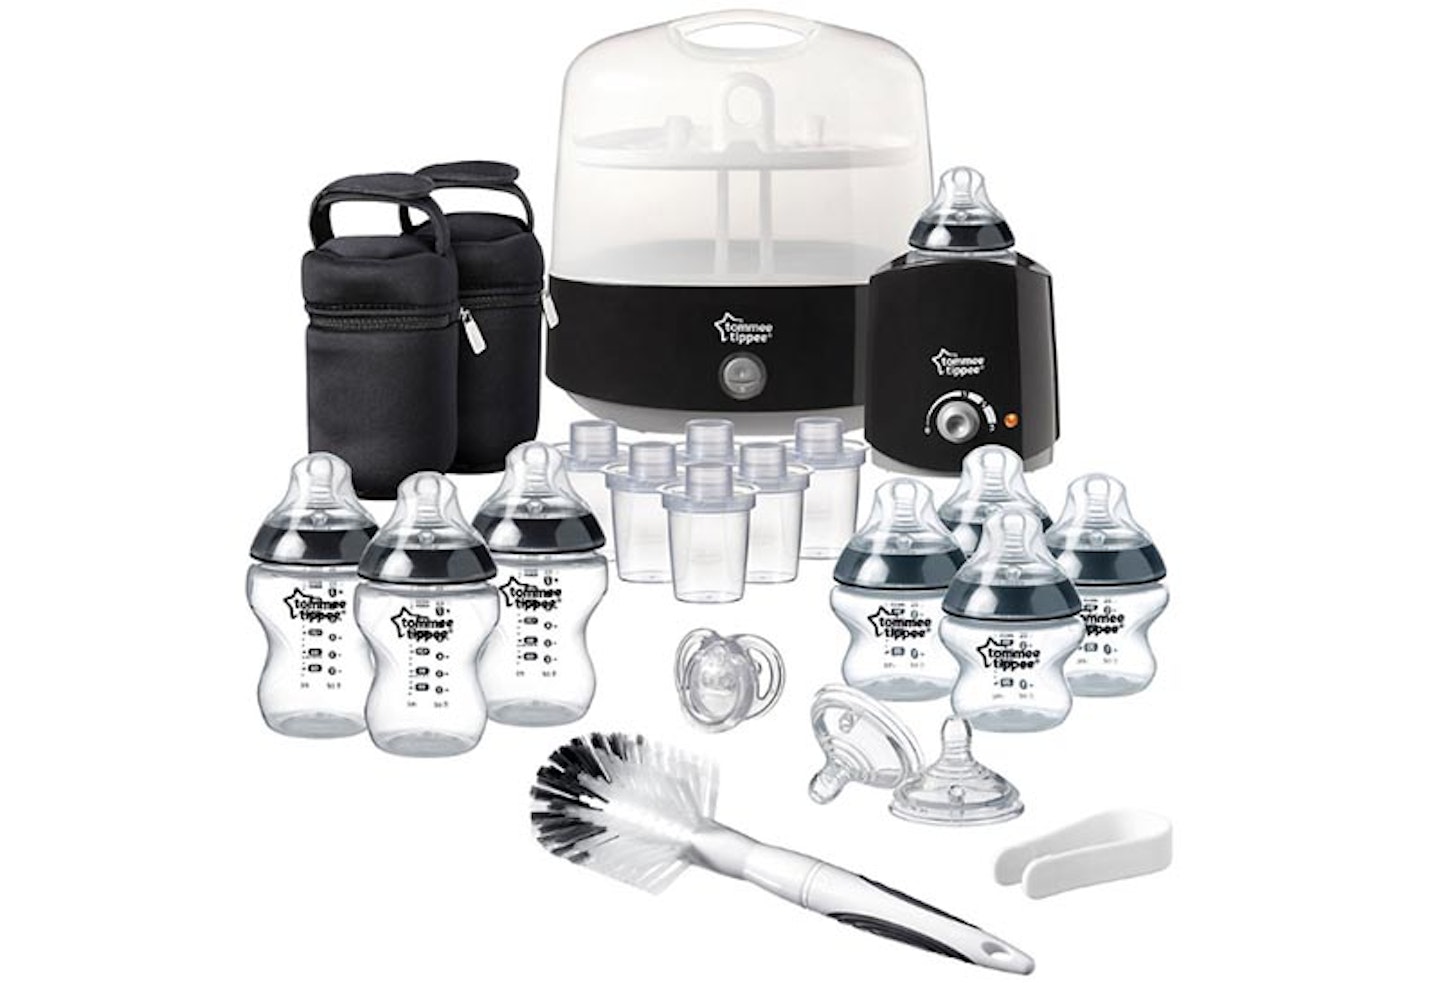 Tommee Tippee Closer to Nature Complete Feeding Set review